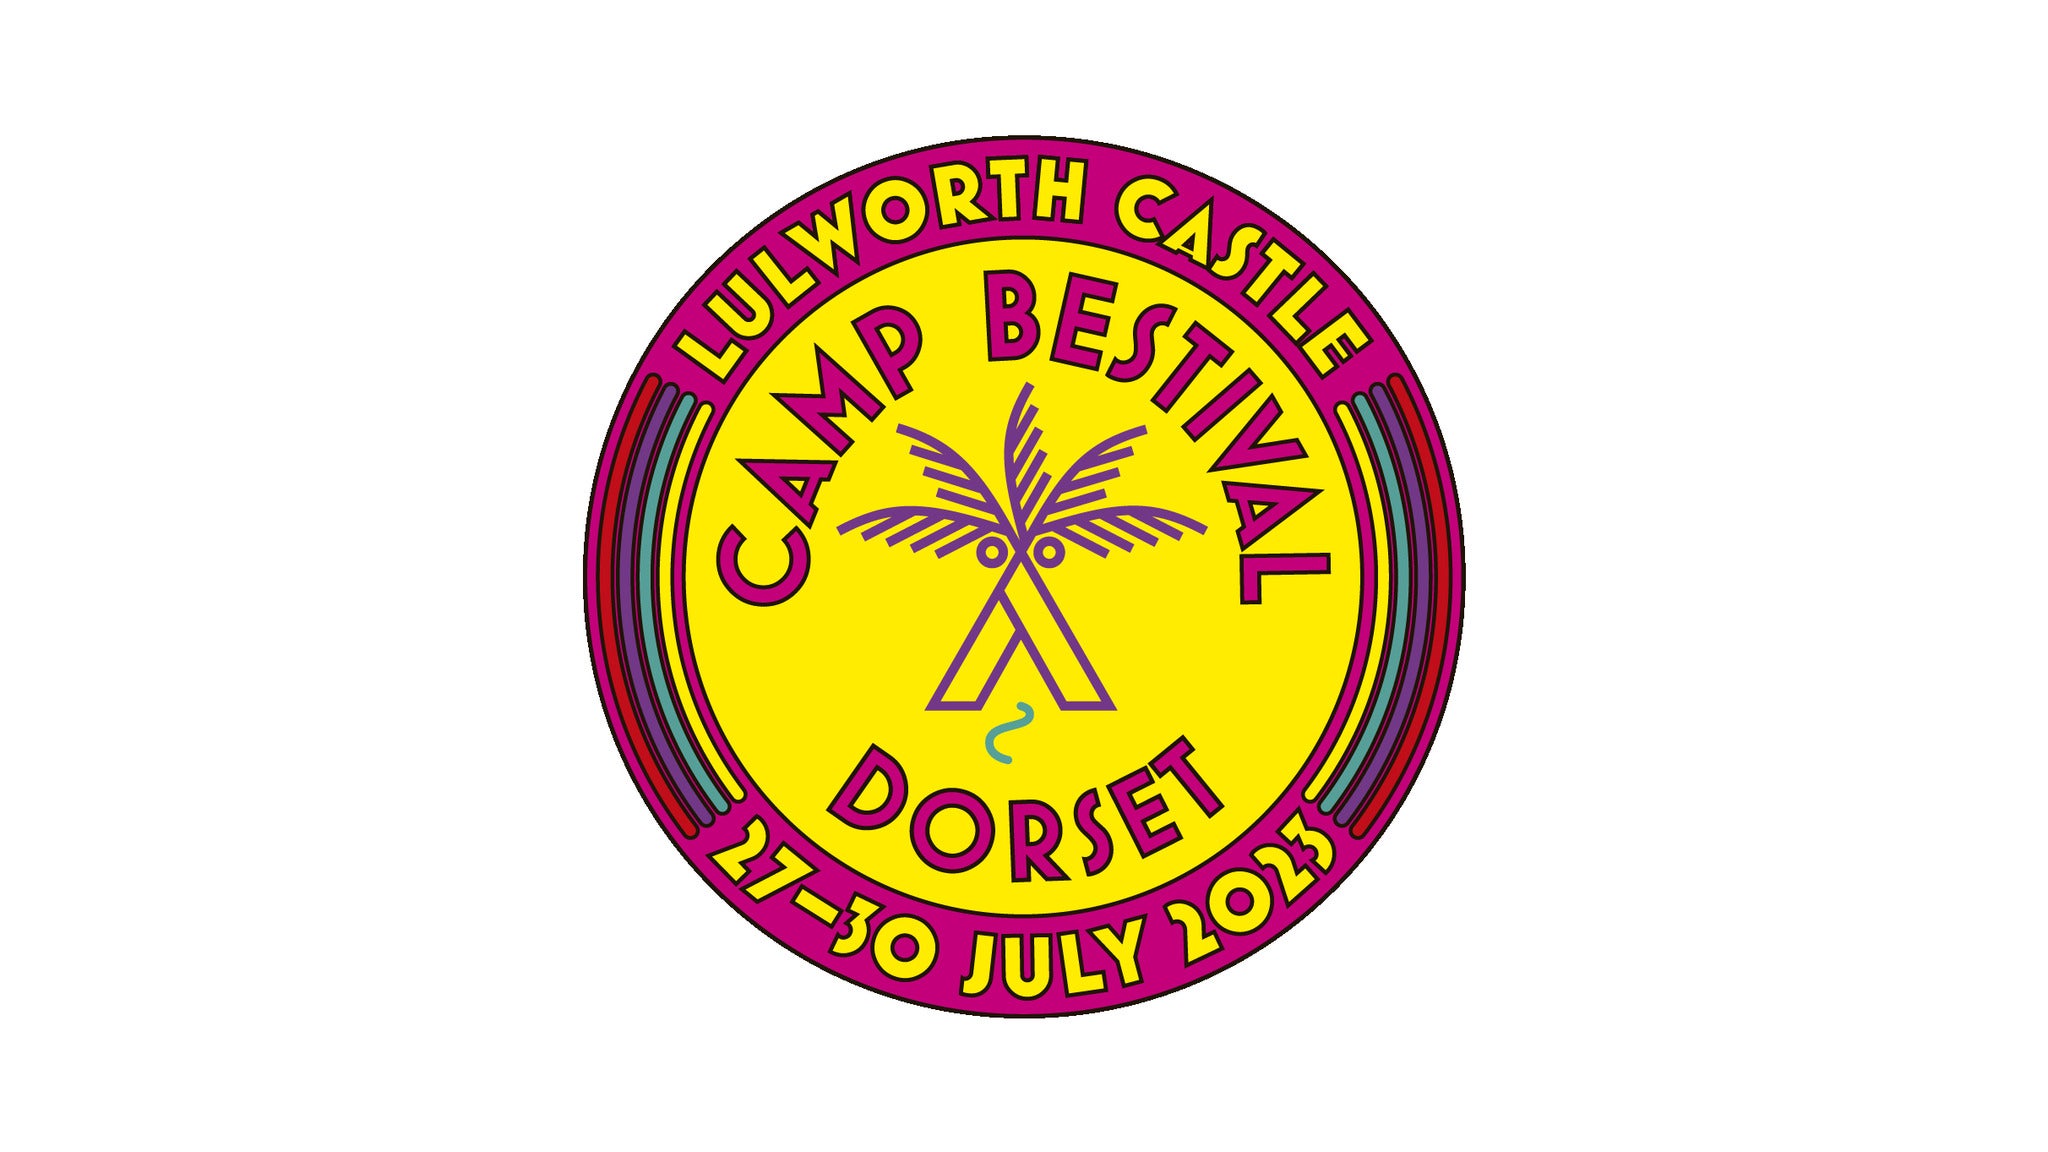 Image used with permission from Ticketmaster | Camp Bestival Dorset Boutique - Standard BellePad for 2, 4 or 6 tickets